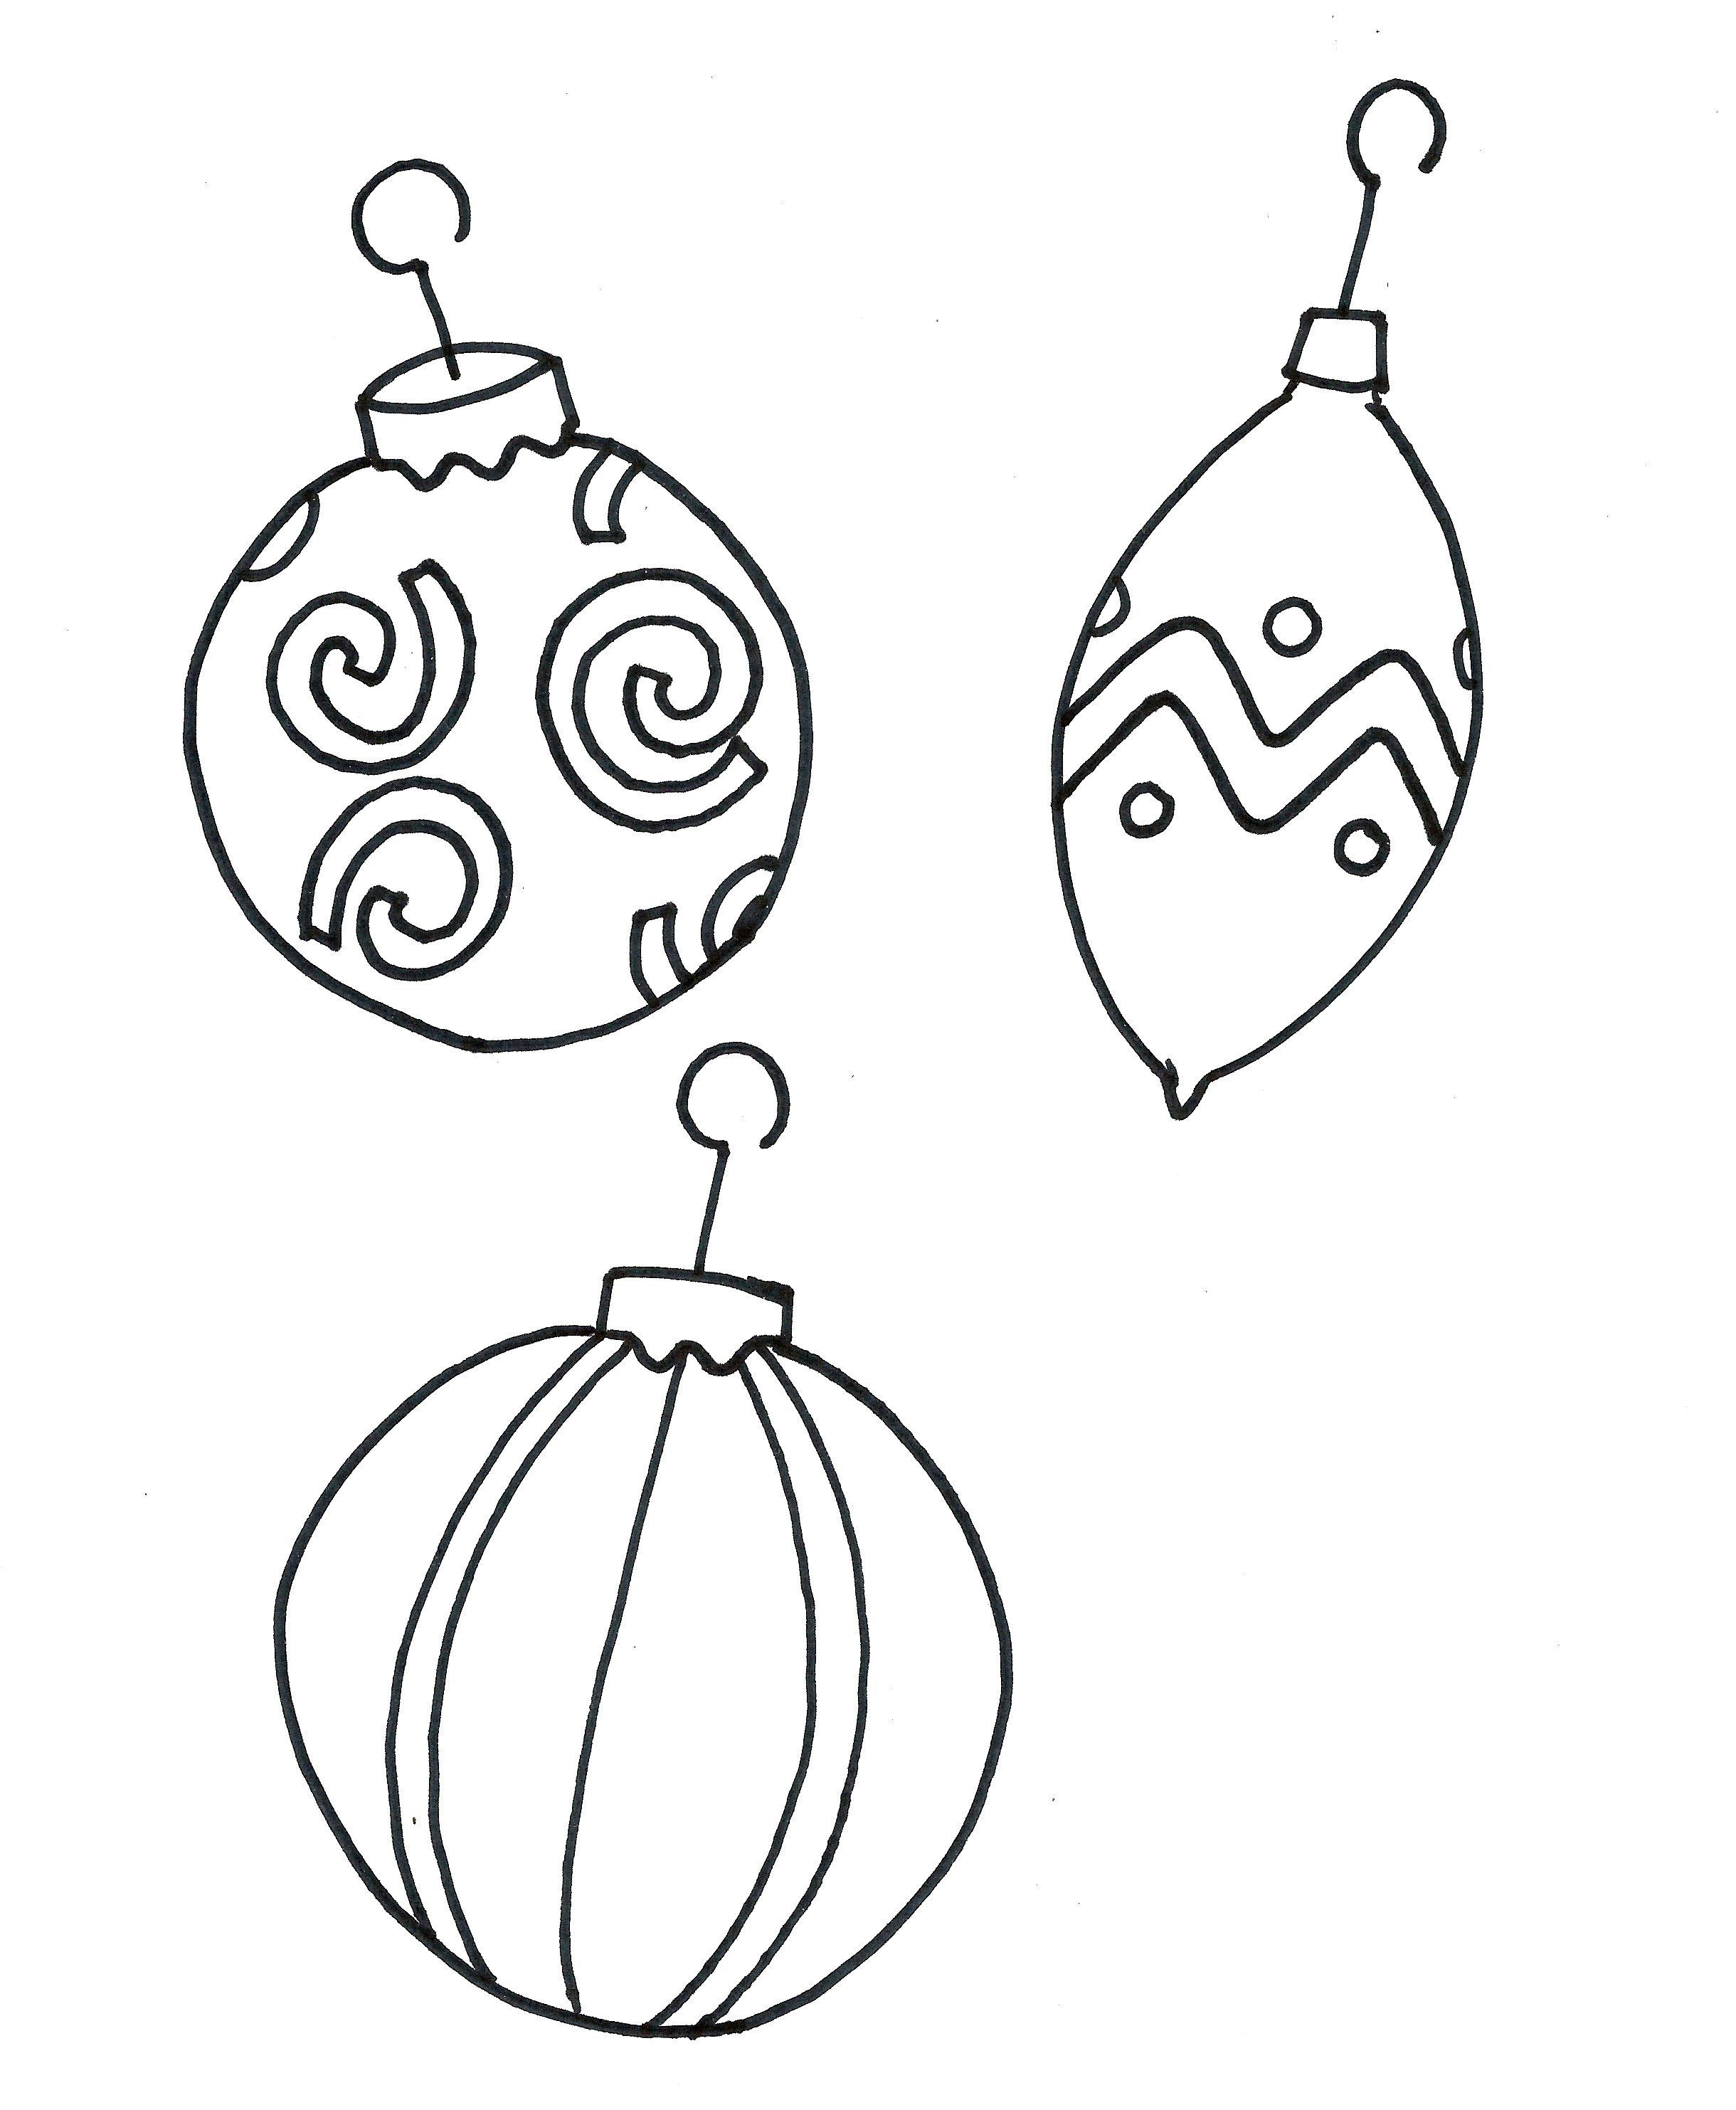 Printable Coloring Pages Christmas Ornament Free | Christmas Crafts - Free Printable Ornaments To Color